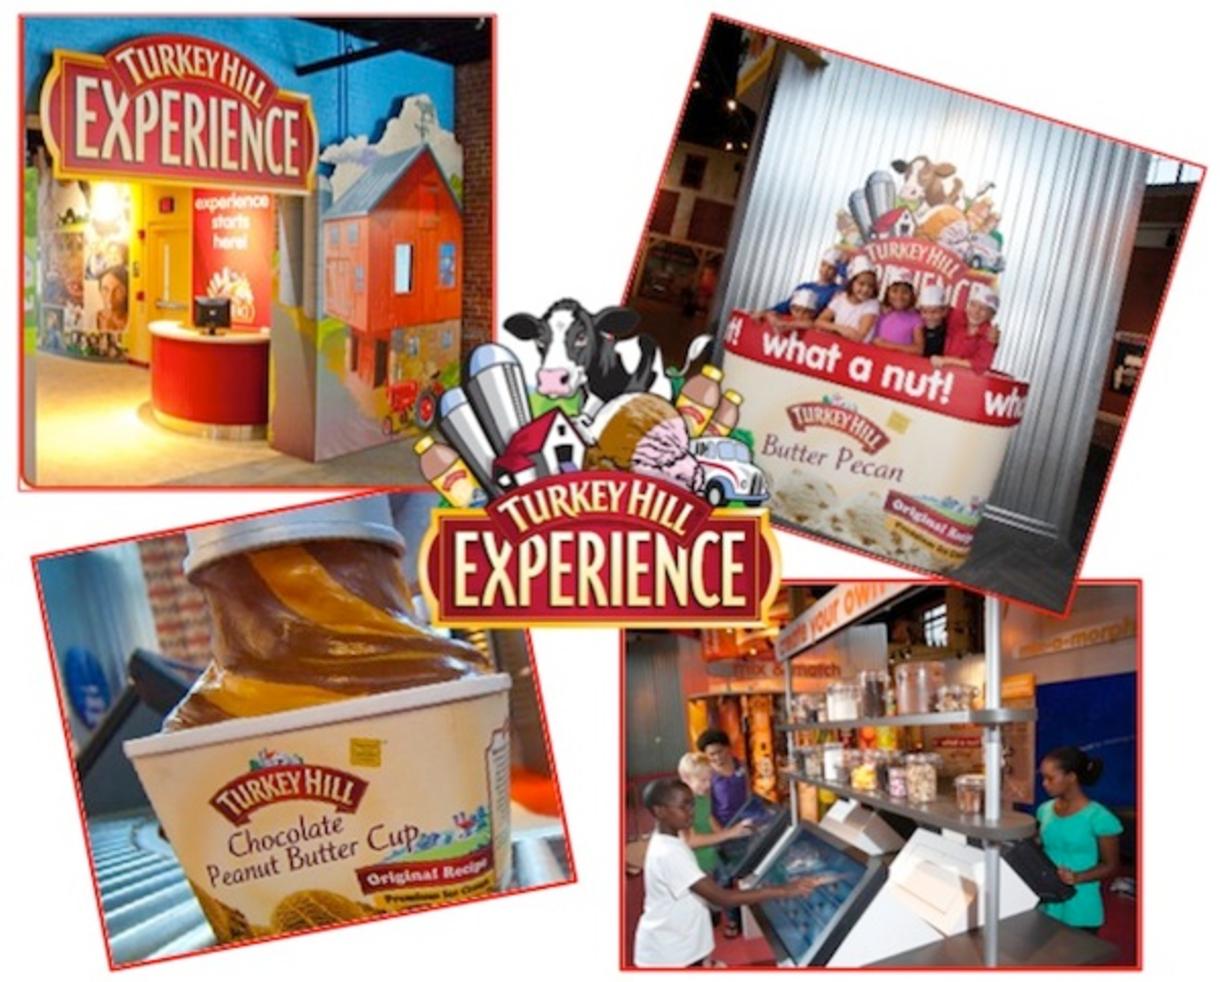 Save 30% off Admission to Turkey Hill Experience in PA!